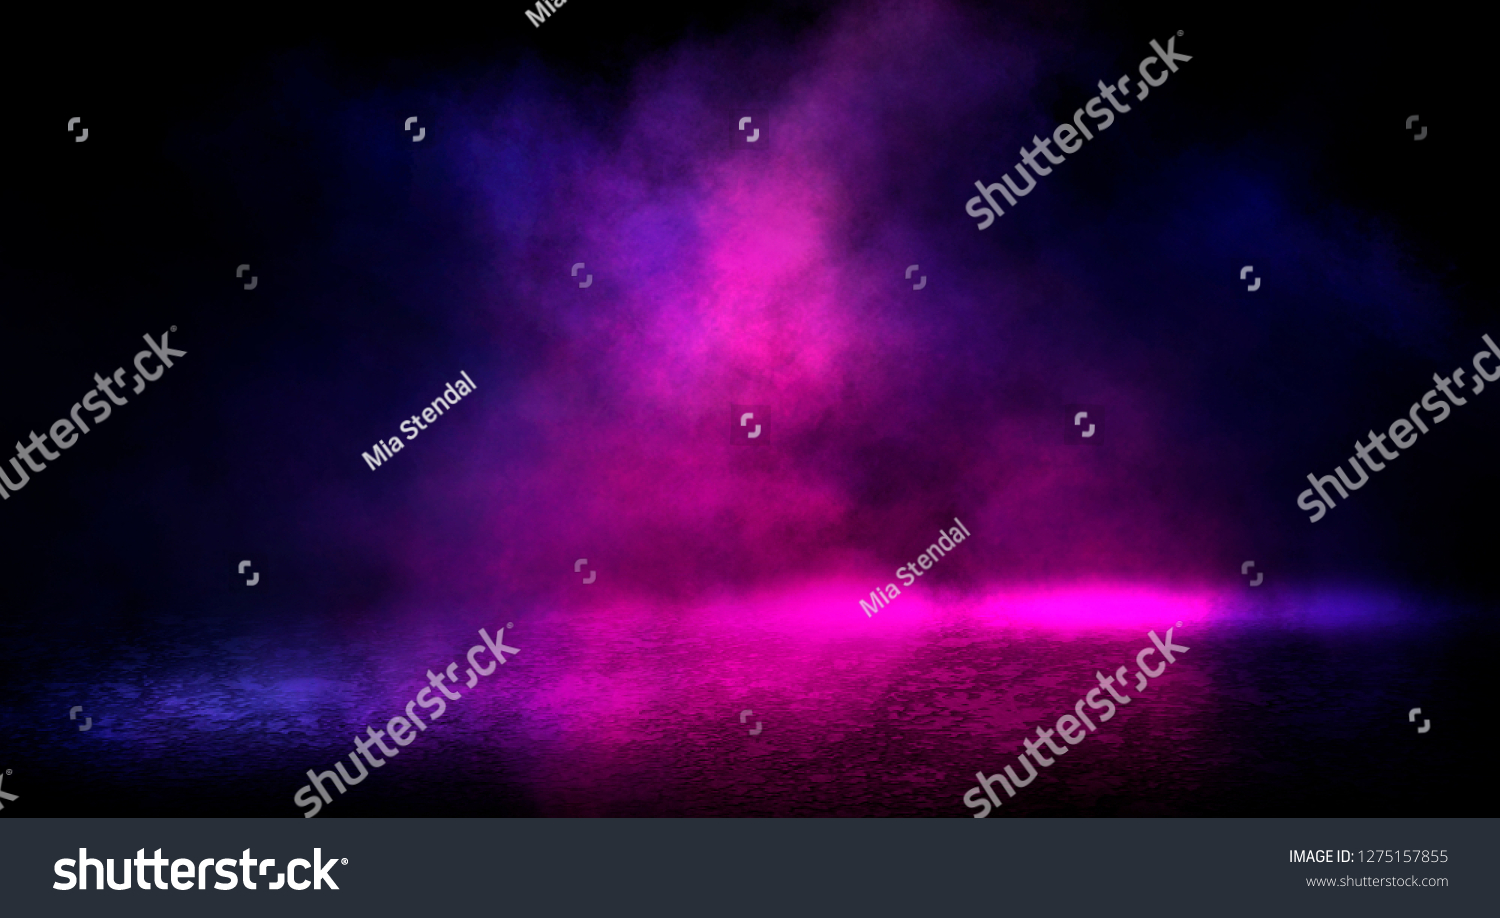 Empty scene with glowing pink and blue smoke environment atmosphere on floor. Fashion vibrant colors spectrum background. #1275157855